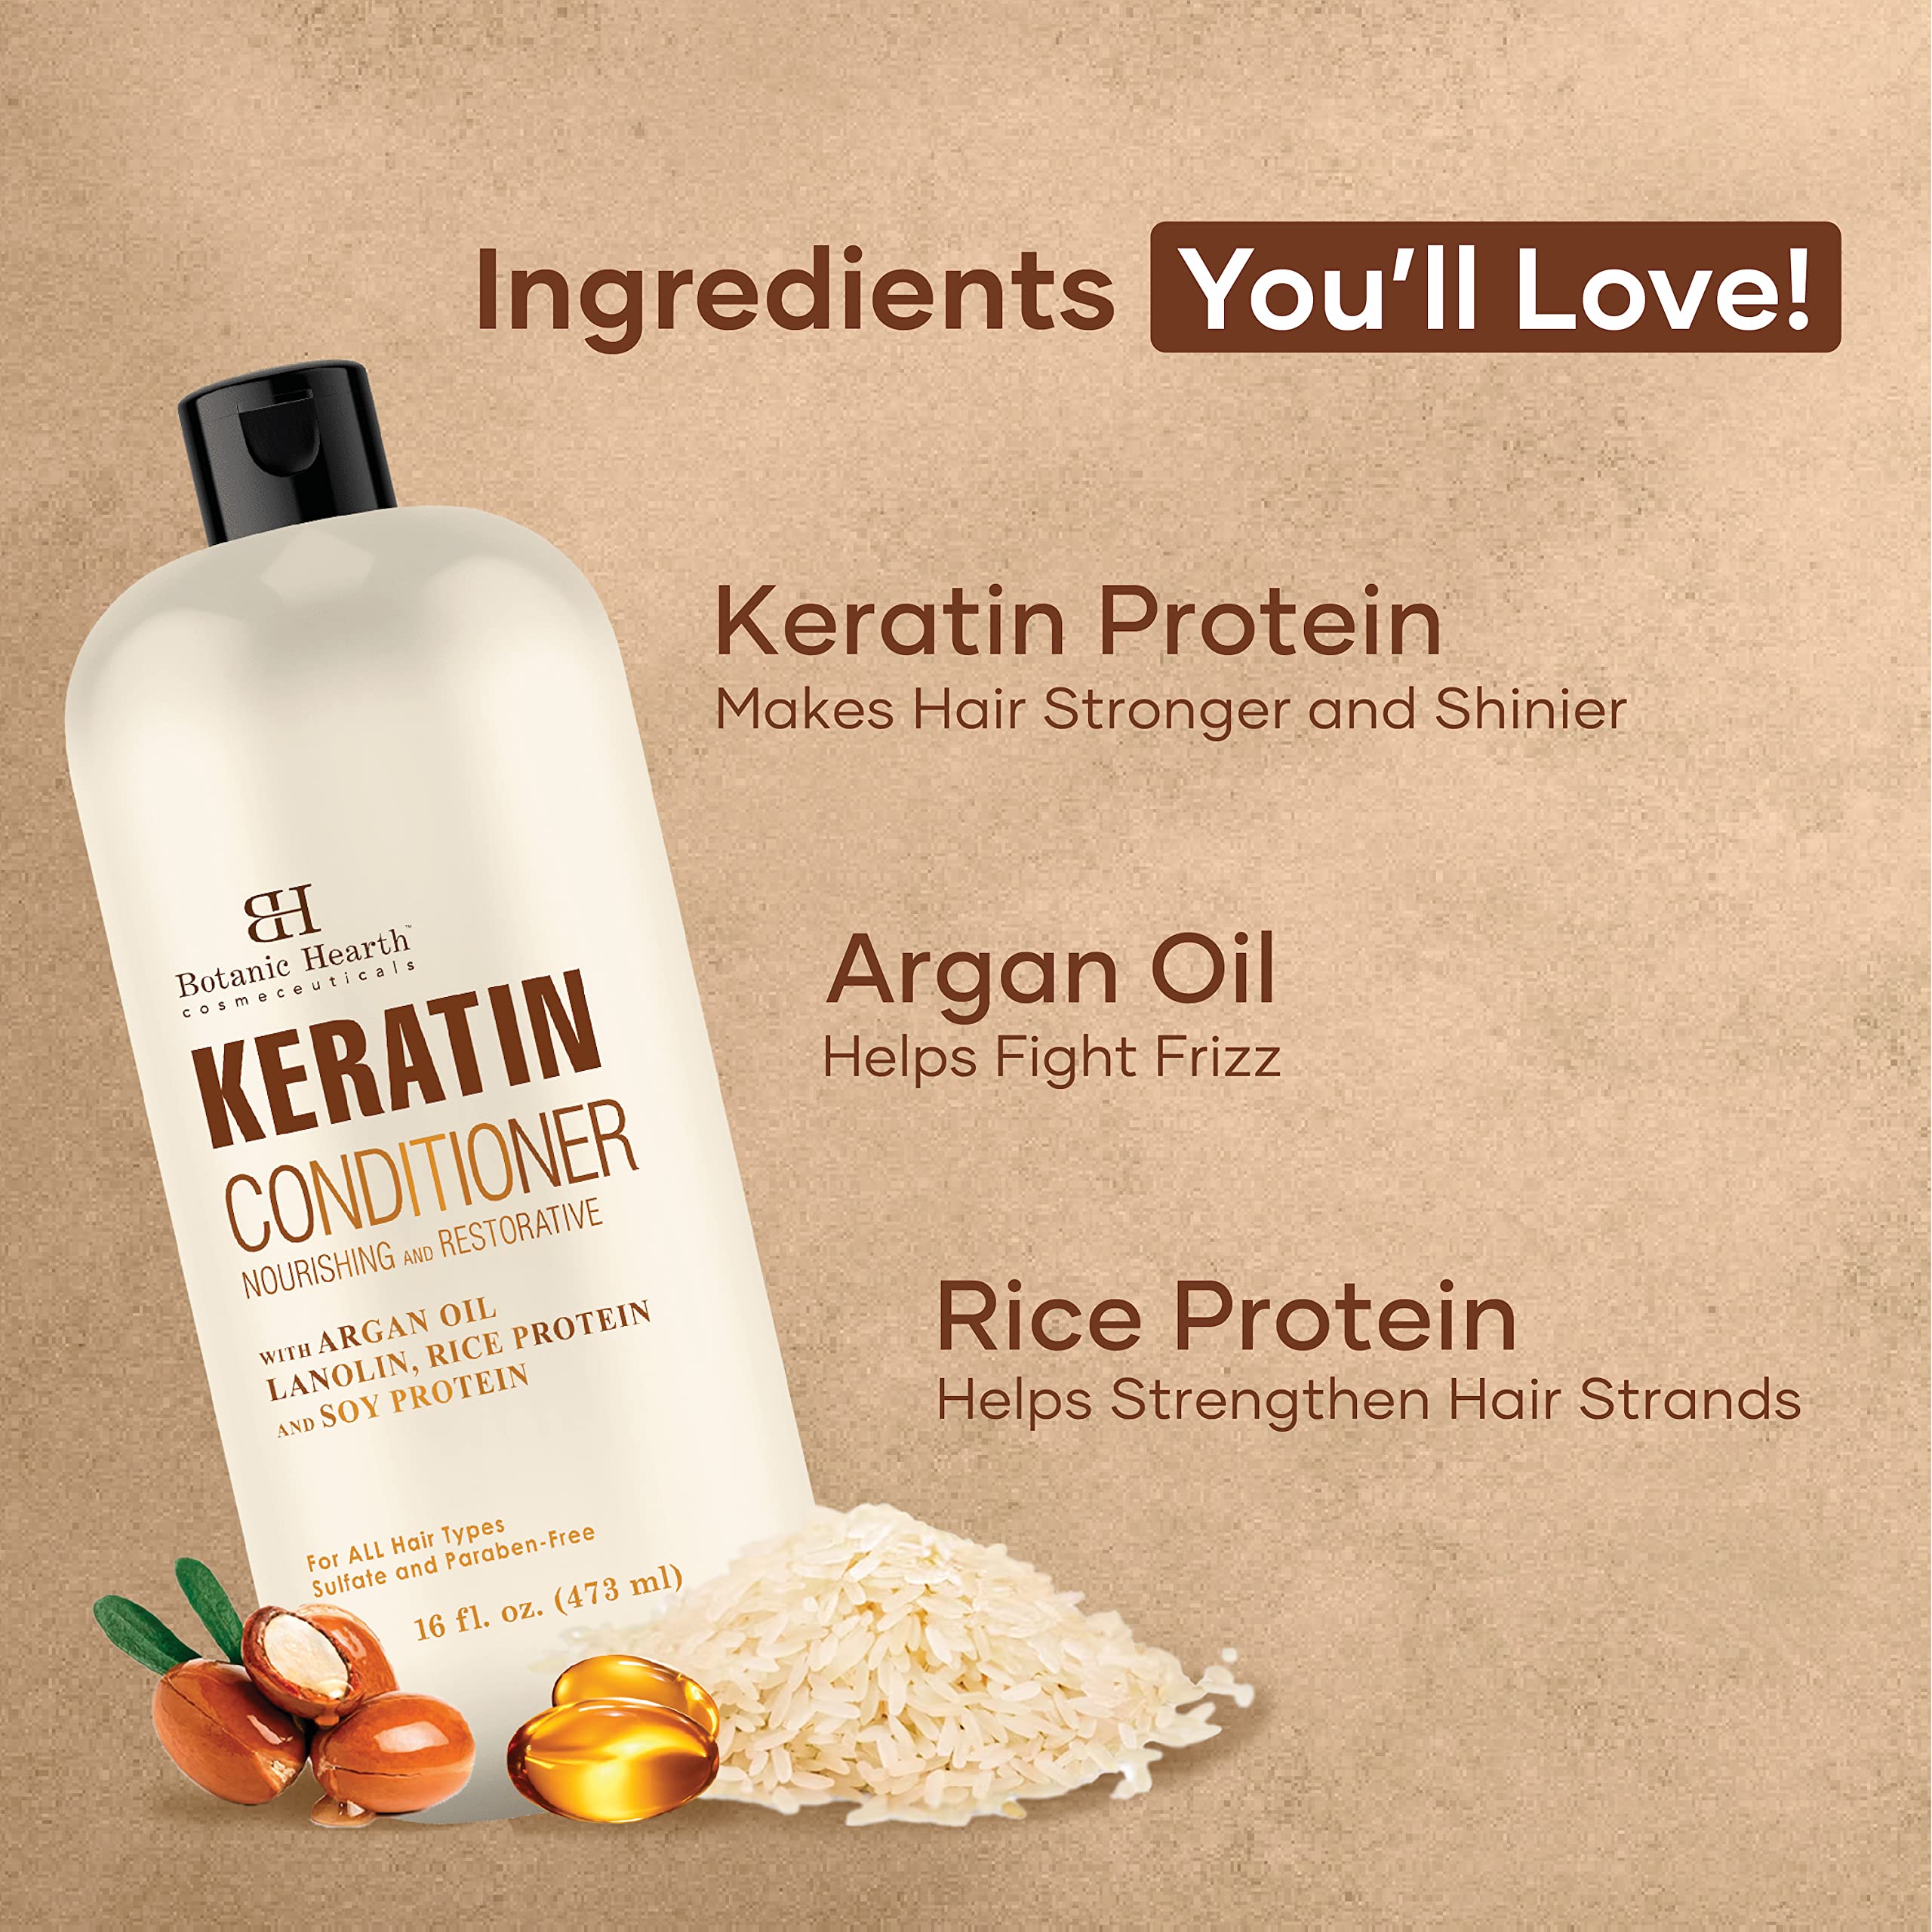 Botanic Hearth Keratin Conditioner with Argan Oil Natural Sulfate Free Keratin Hair Treatment for Normal, Dry or Damaged Hair - All Hair Types, Women and Men, Color Treated Hair - 16 fl oz